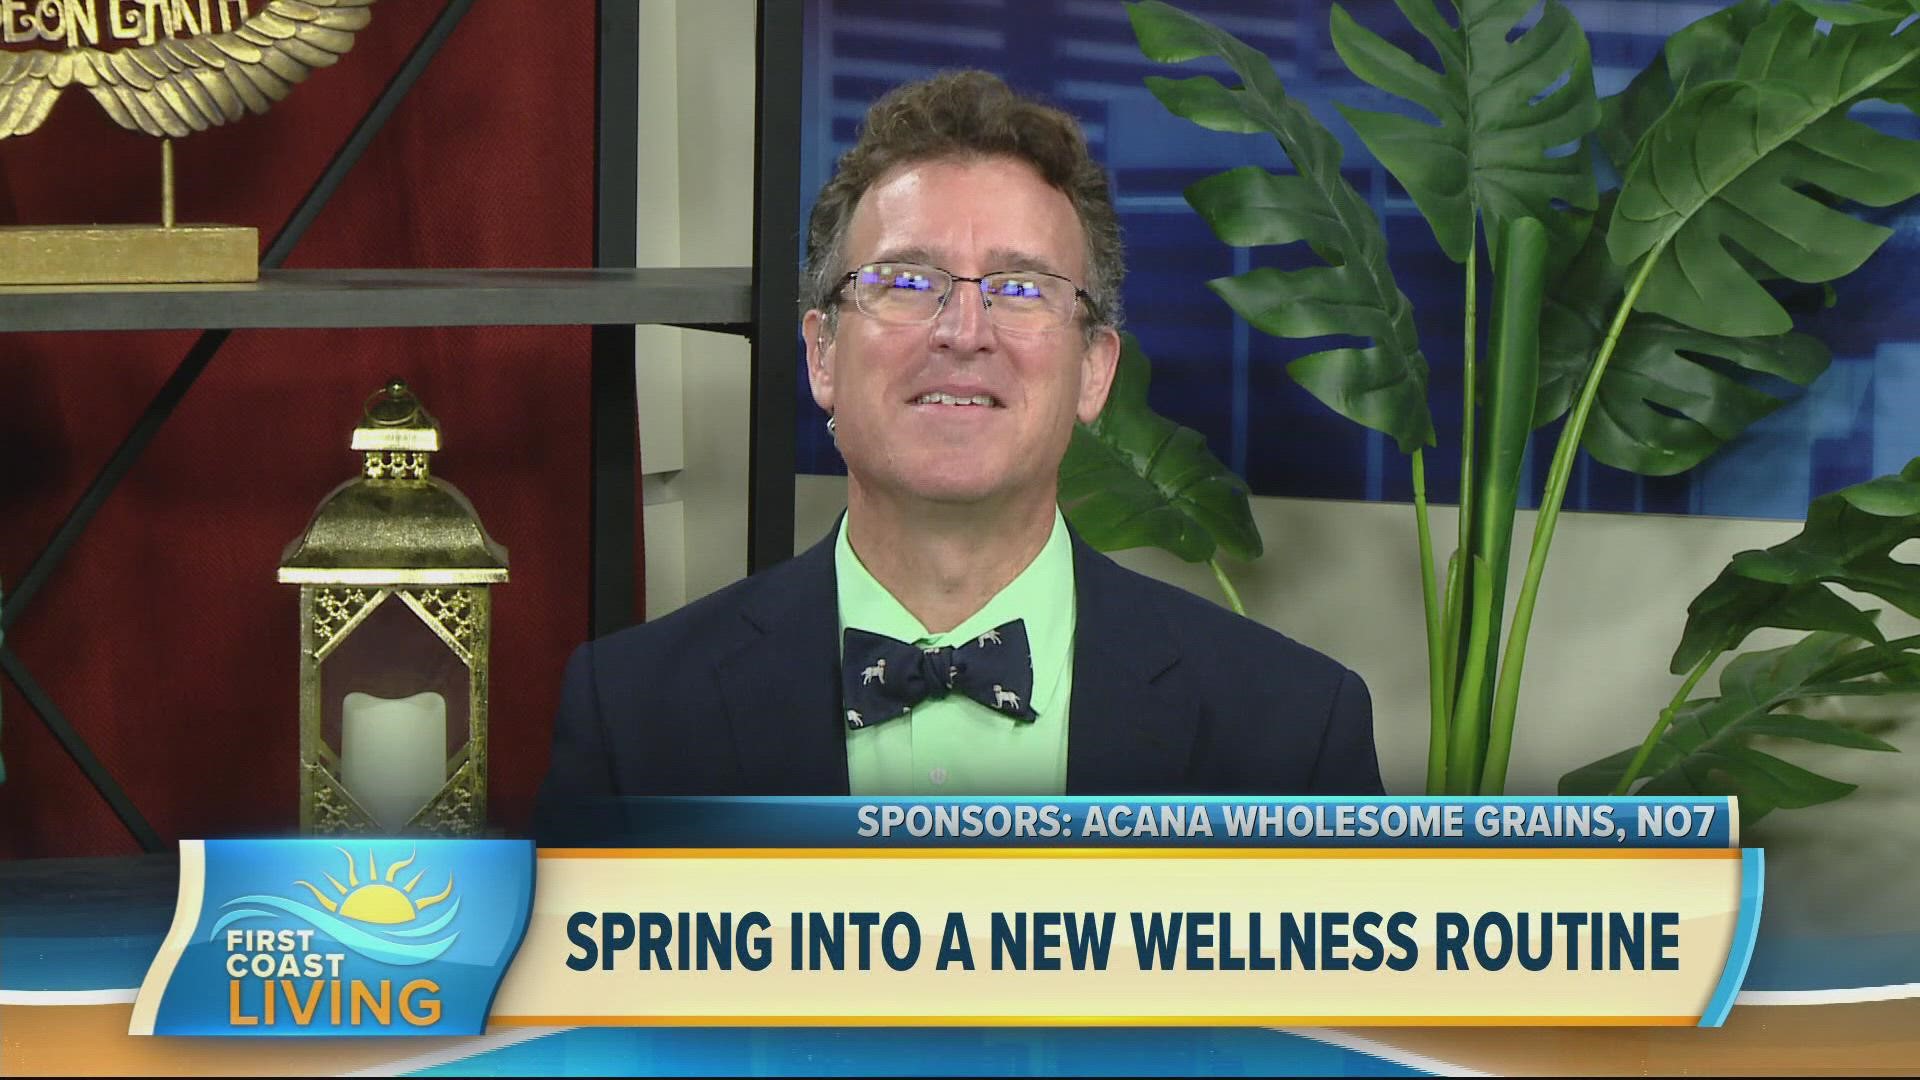 Wellness lifestyle expert Jamie Hess shares tips to 
relax, regroup and renew to Spring into the new season.